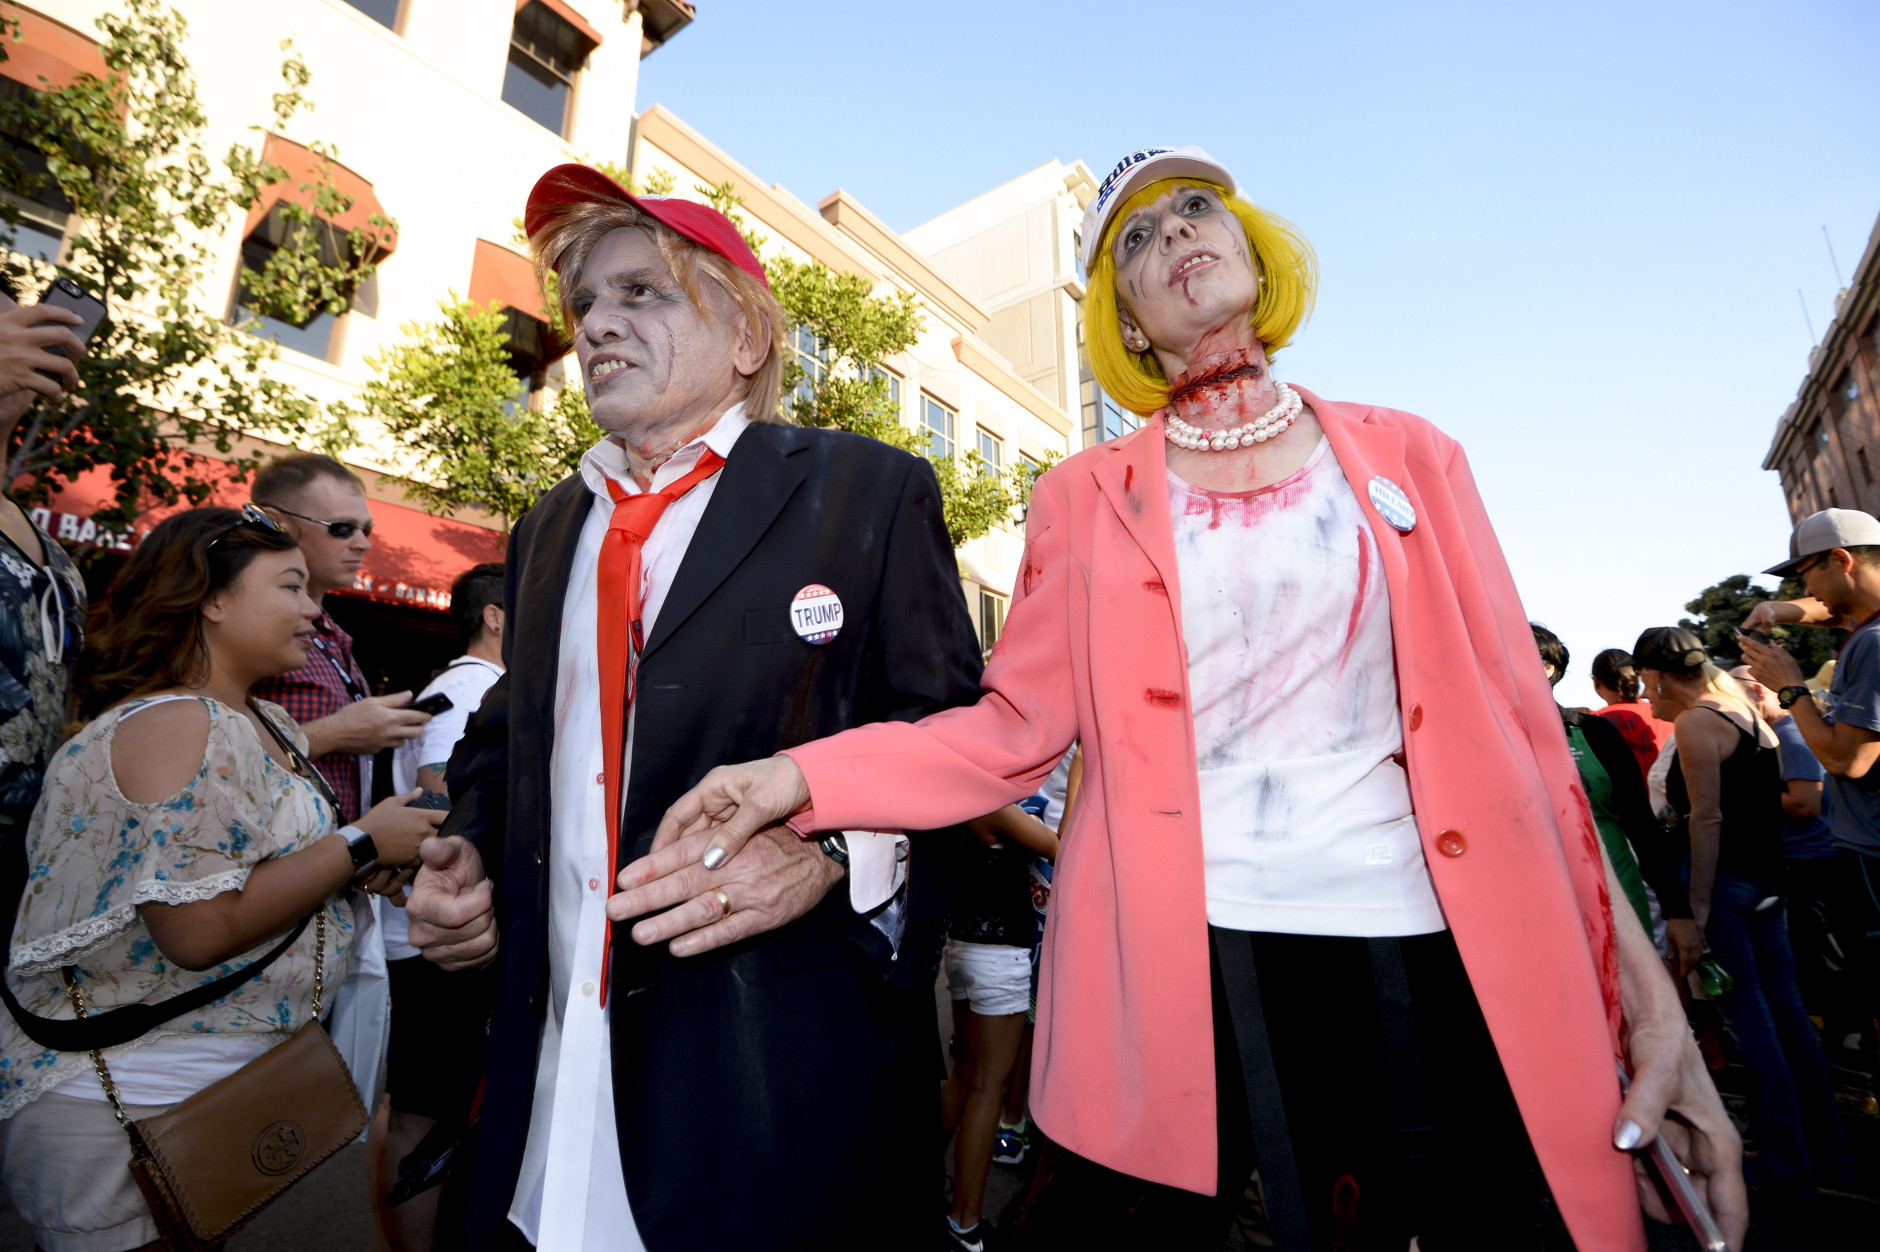 Husband and wife Dave Hester and Donna Hester, dressed as zombie Donald Trump and zombie Hillary Clinton, walk down Fifth Avenue as they take part in the Zombie Walk on day three of the Comic-Con International held at the San Diego Convention Center Saturday July 23, 2016 in San Diego.  (Photo by Denis Poroy/Invision/AP)